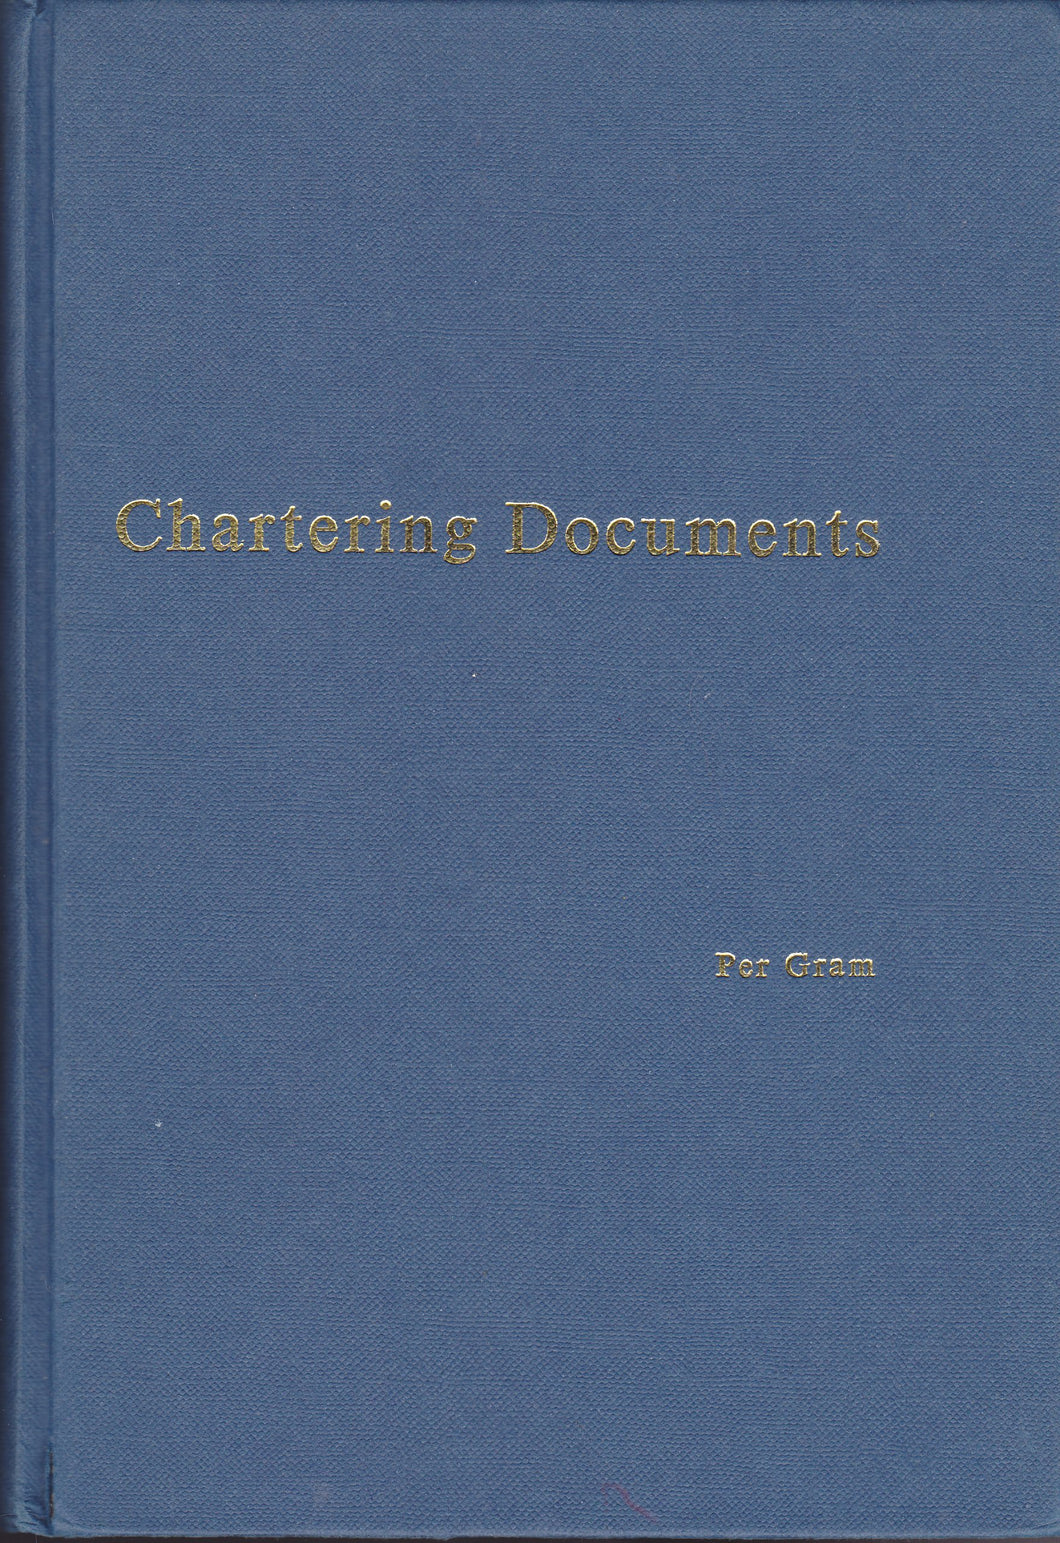 Gram on Chartering Documents